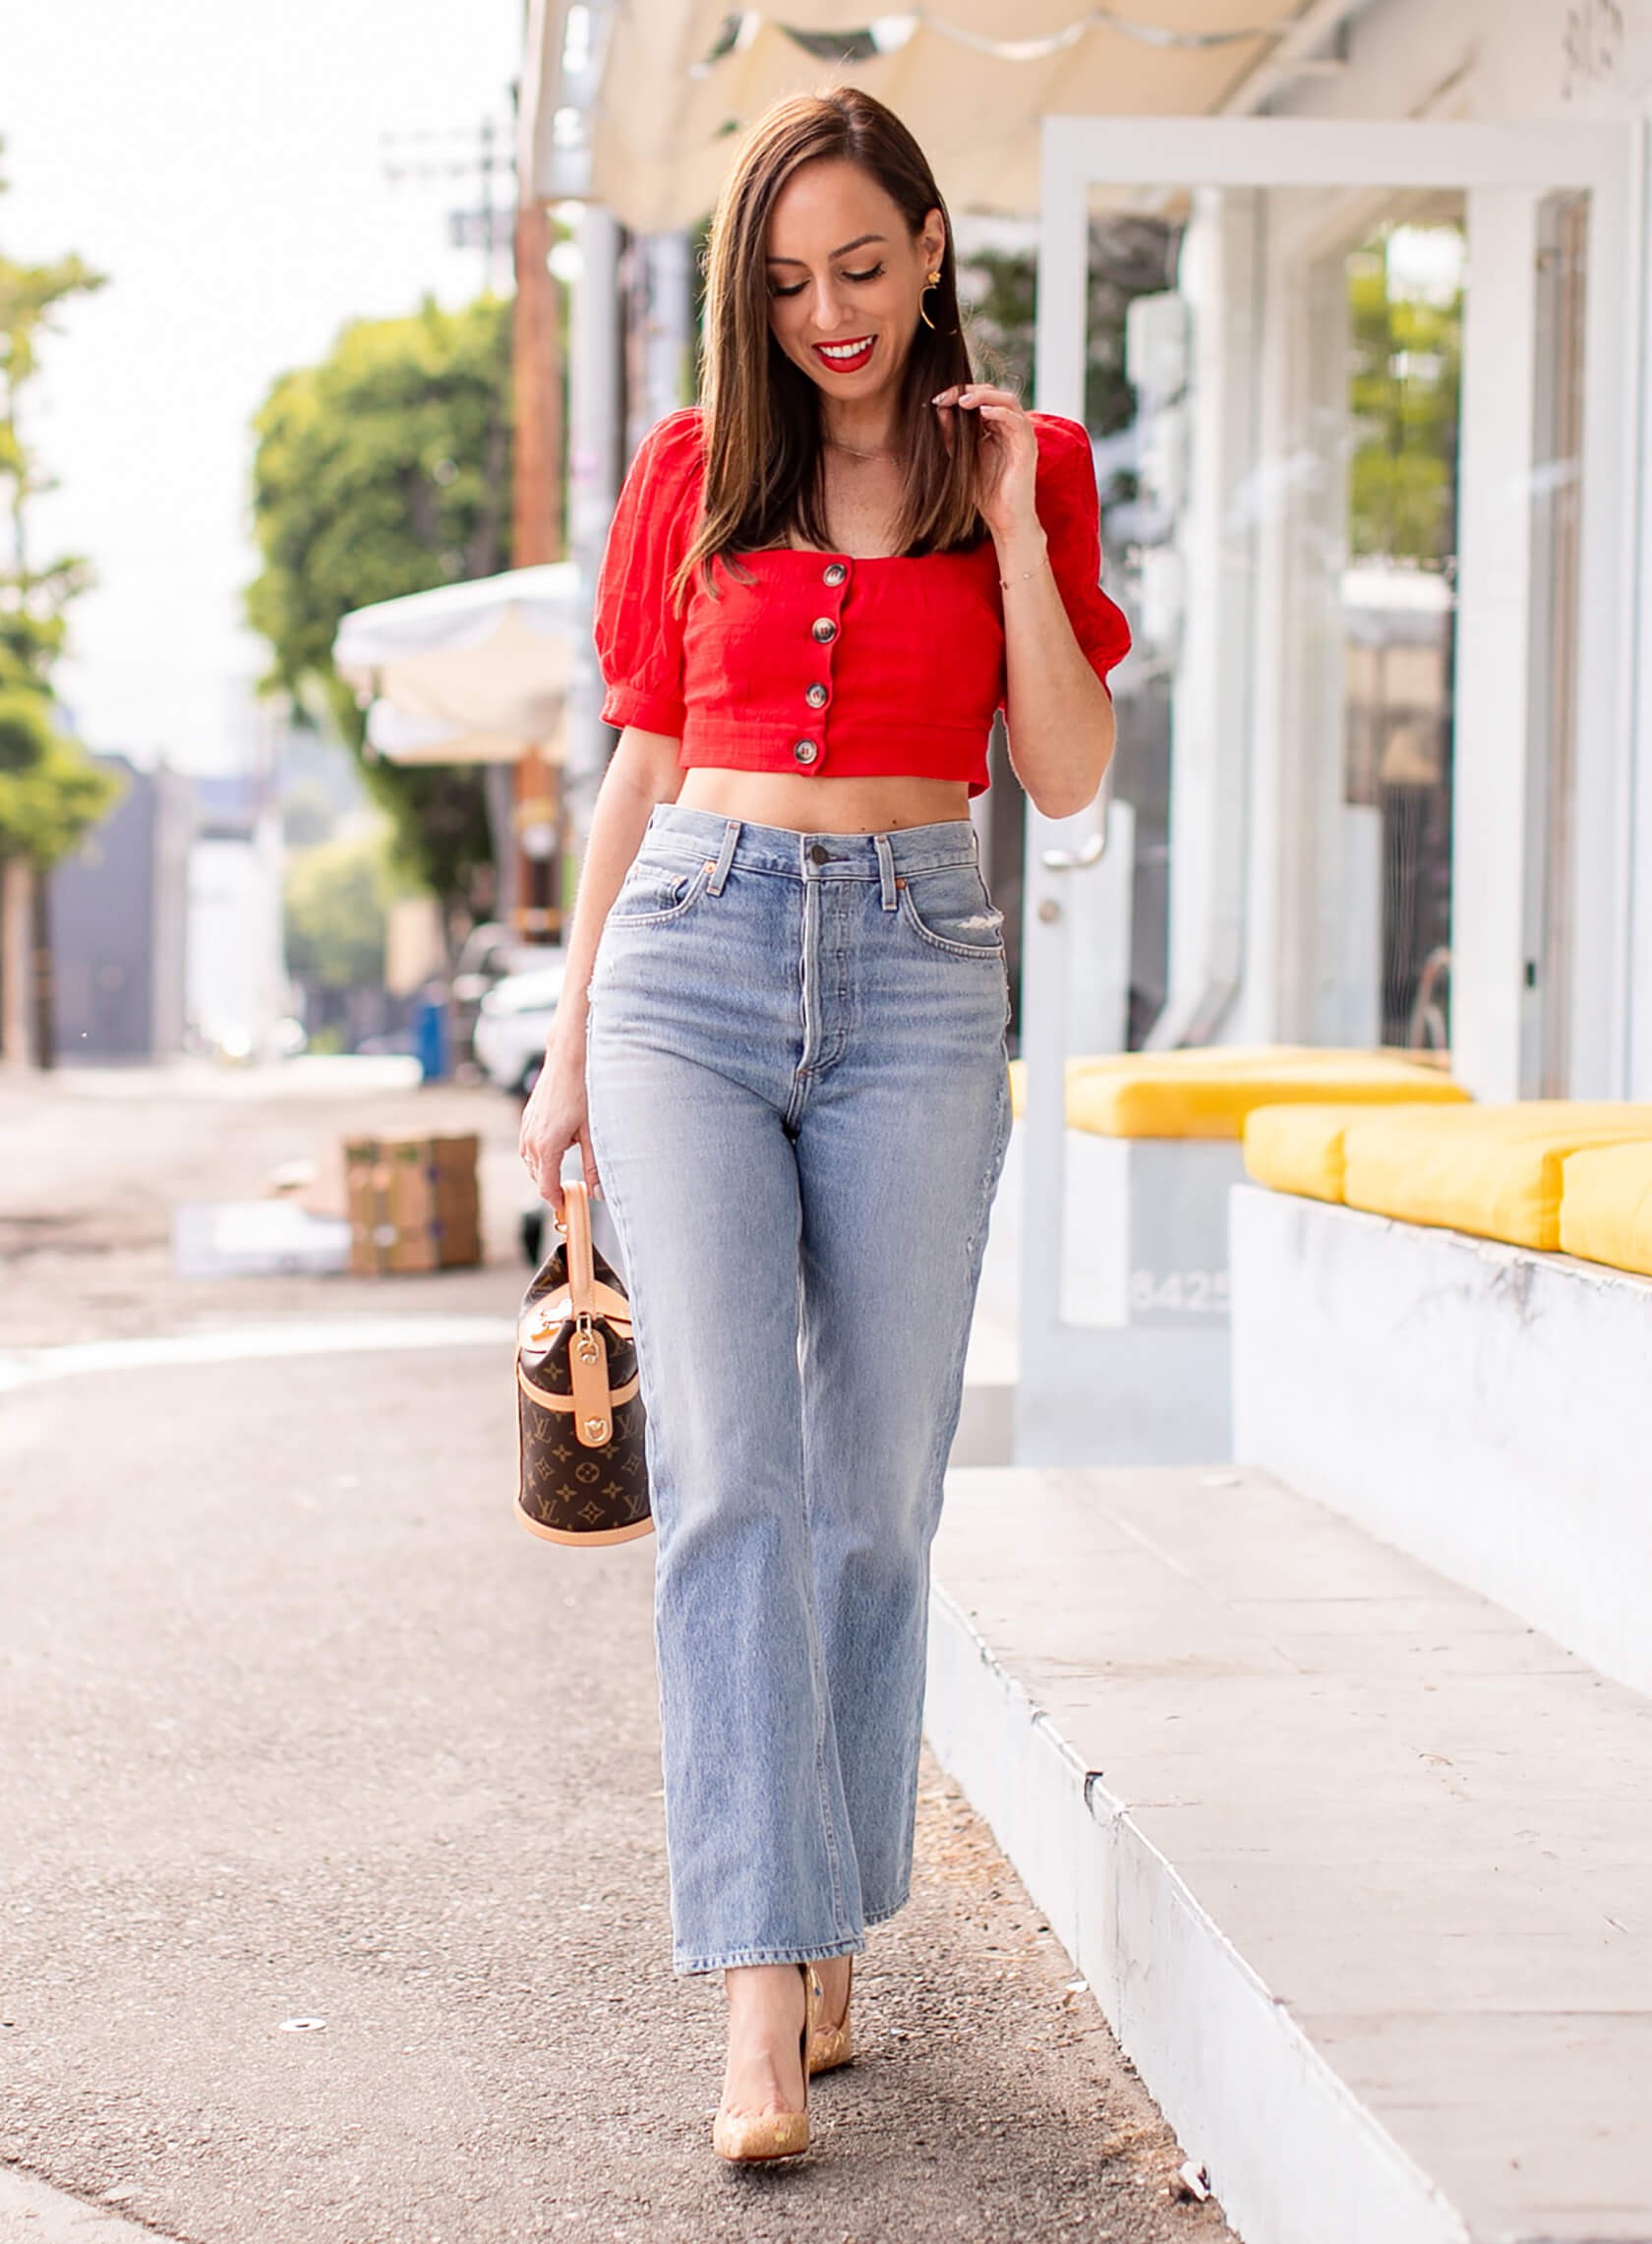 39 Best Red Top Outfit Ideas Images in May 2023